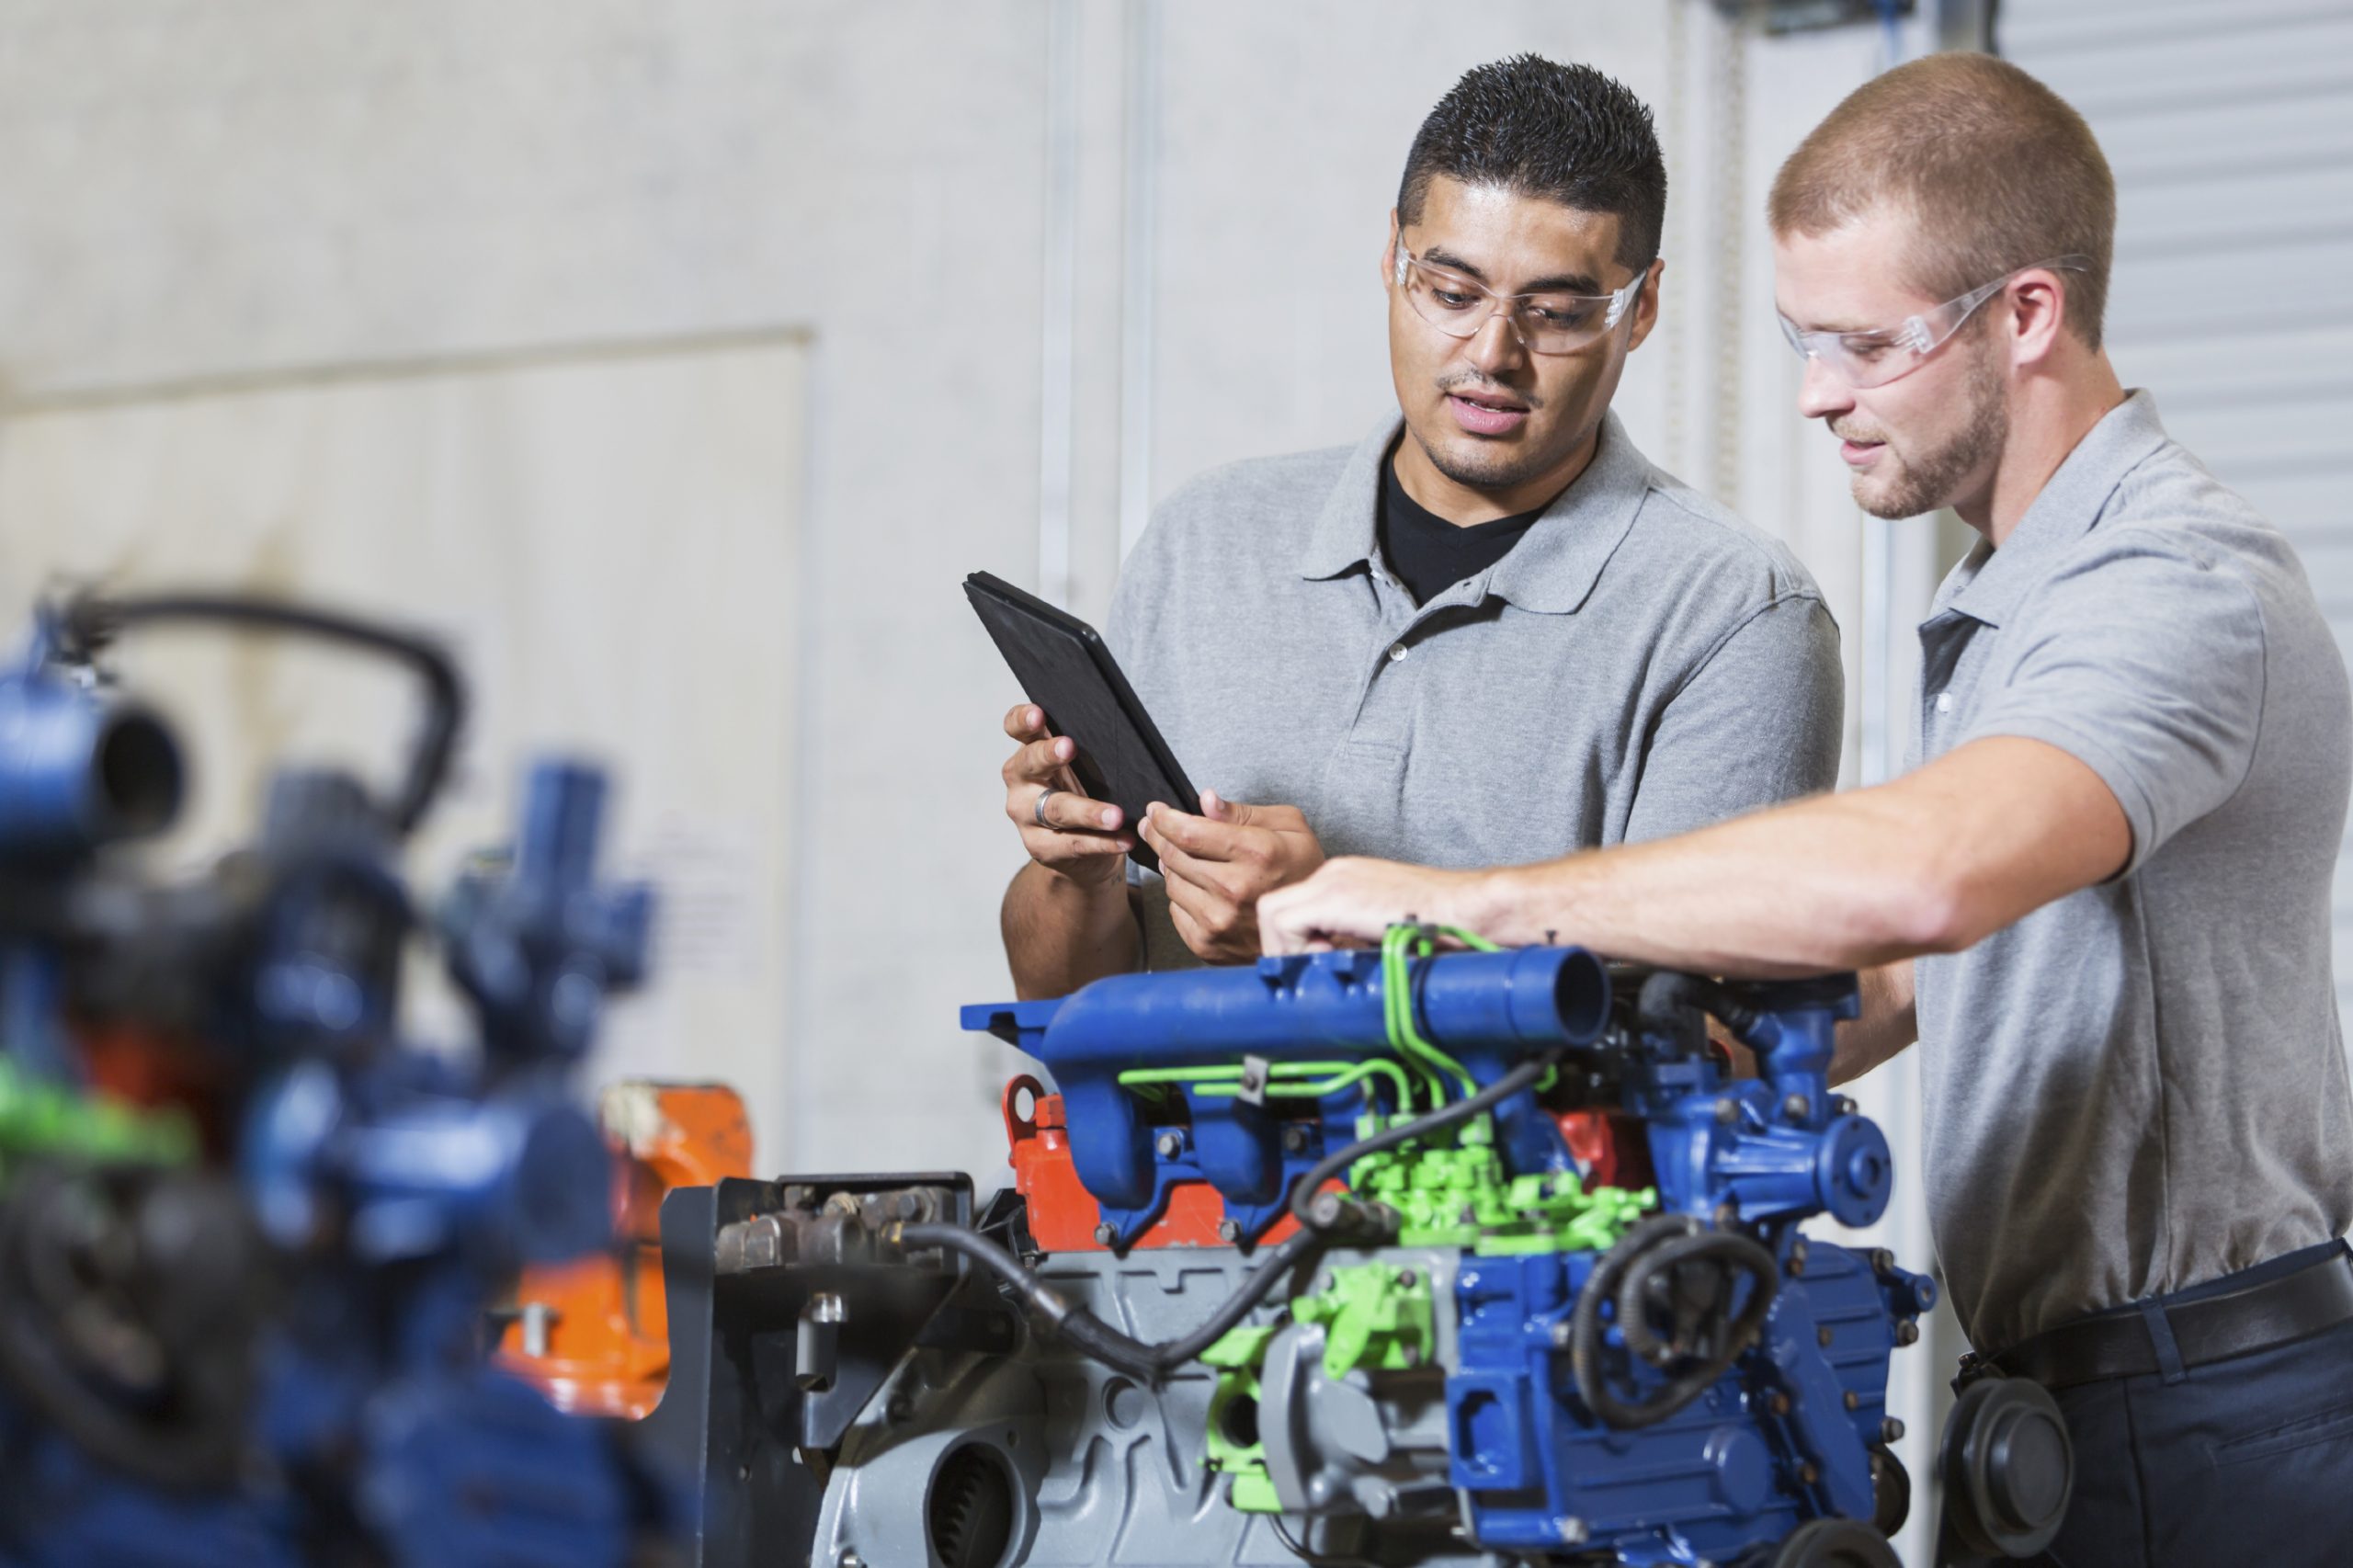 Two multi-ethnic young men in vocational school, taking a class on reparing diesel engines.  They are working on an engine that has had parts painted different colors for training purposes.  They are wearing safety glasses. The Hispanic man is reading a digital tablet.